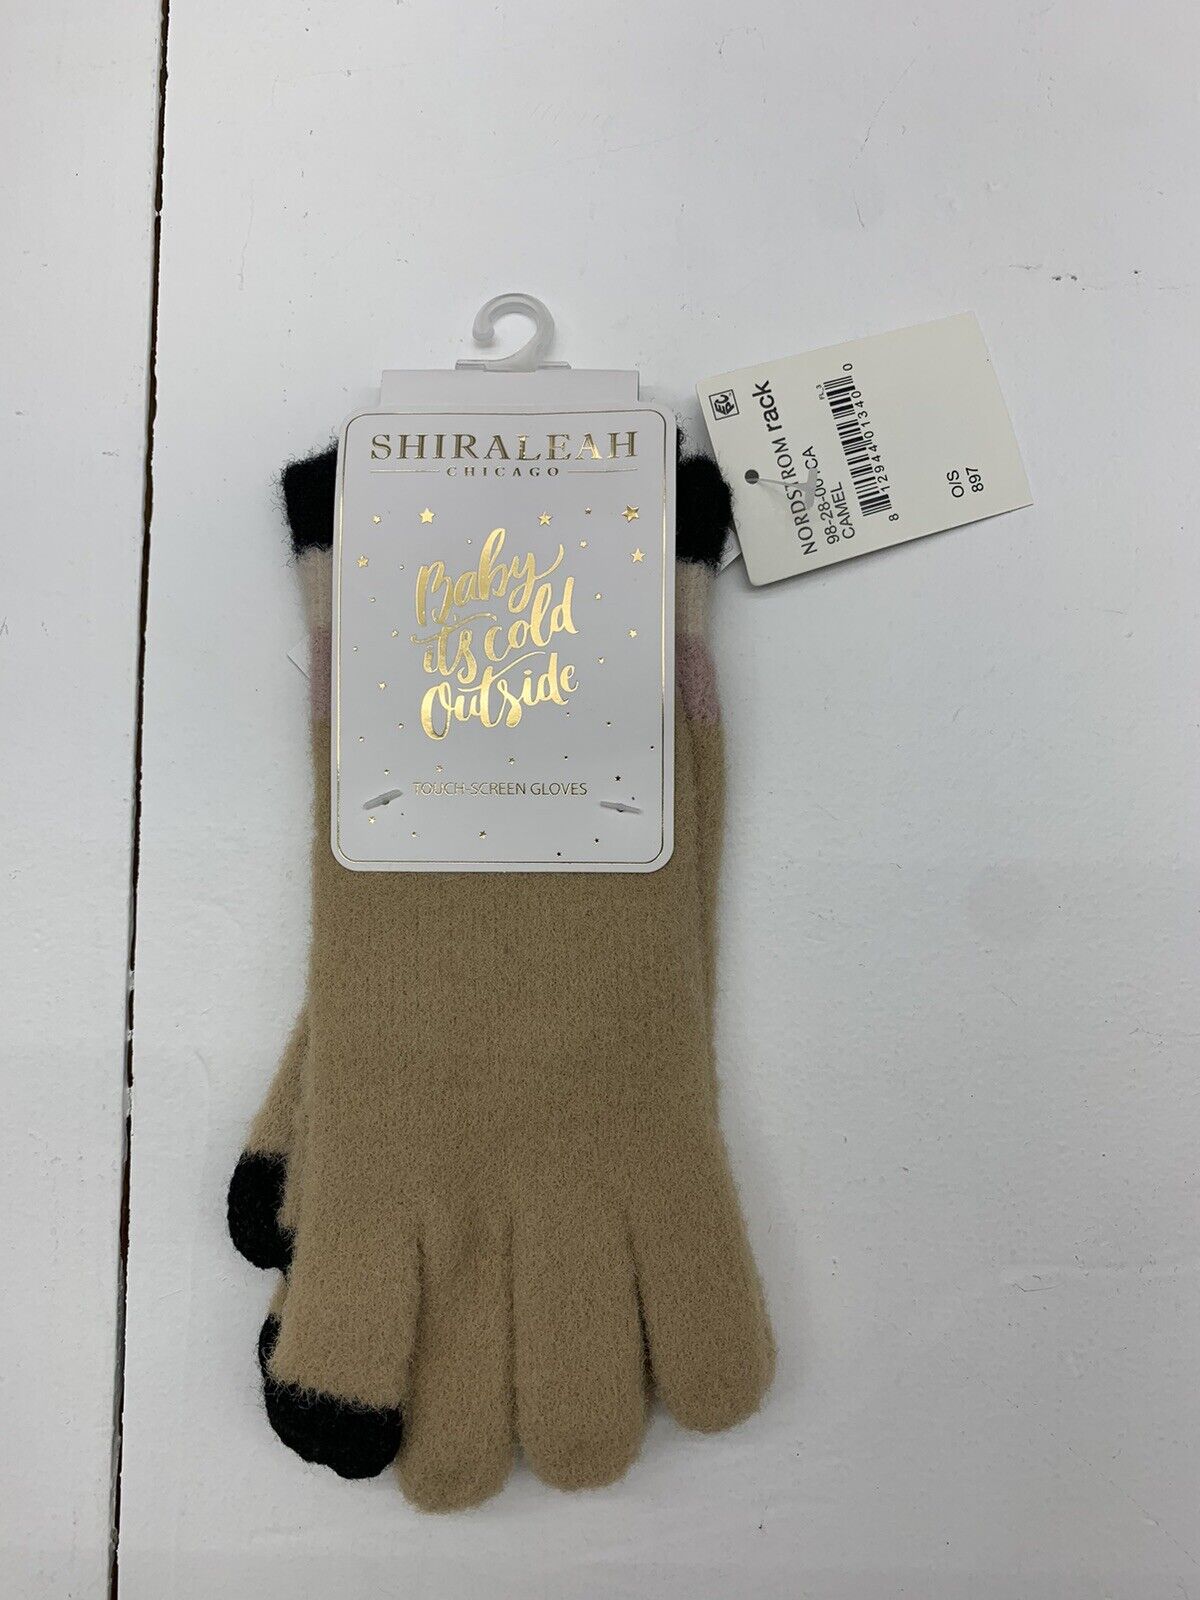 Shiraleah Womens Tan Touch Screen Gloves one size